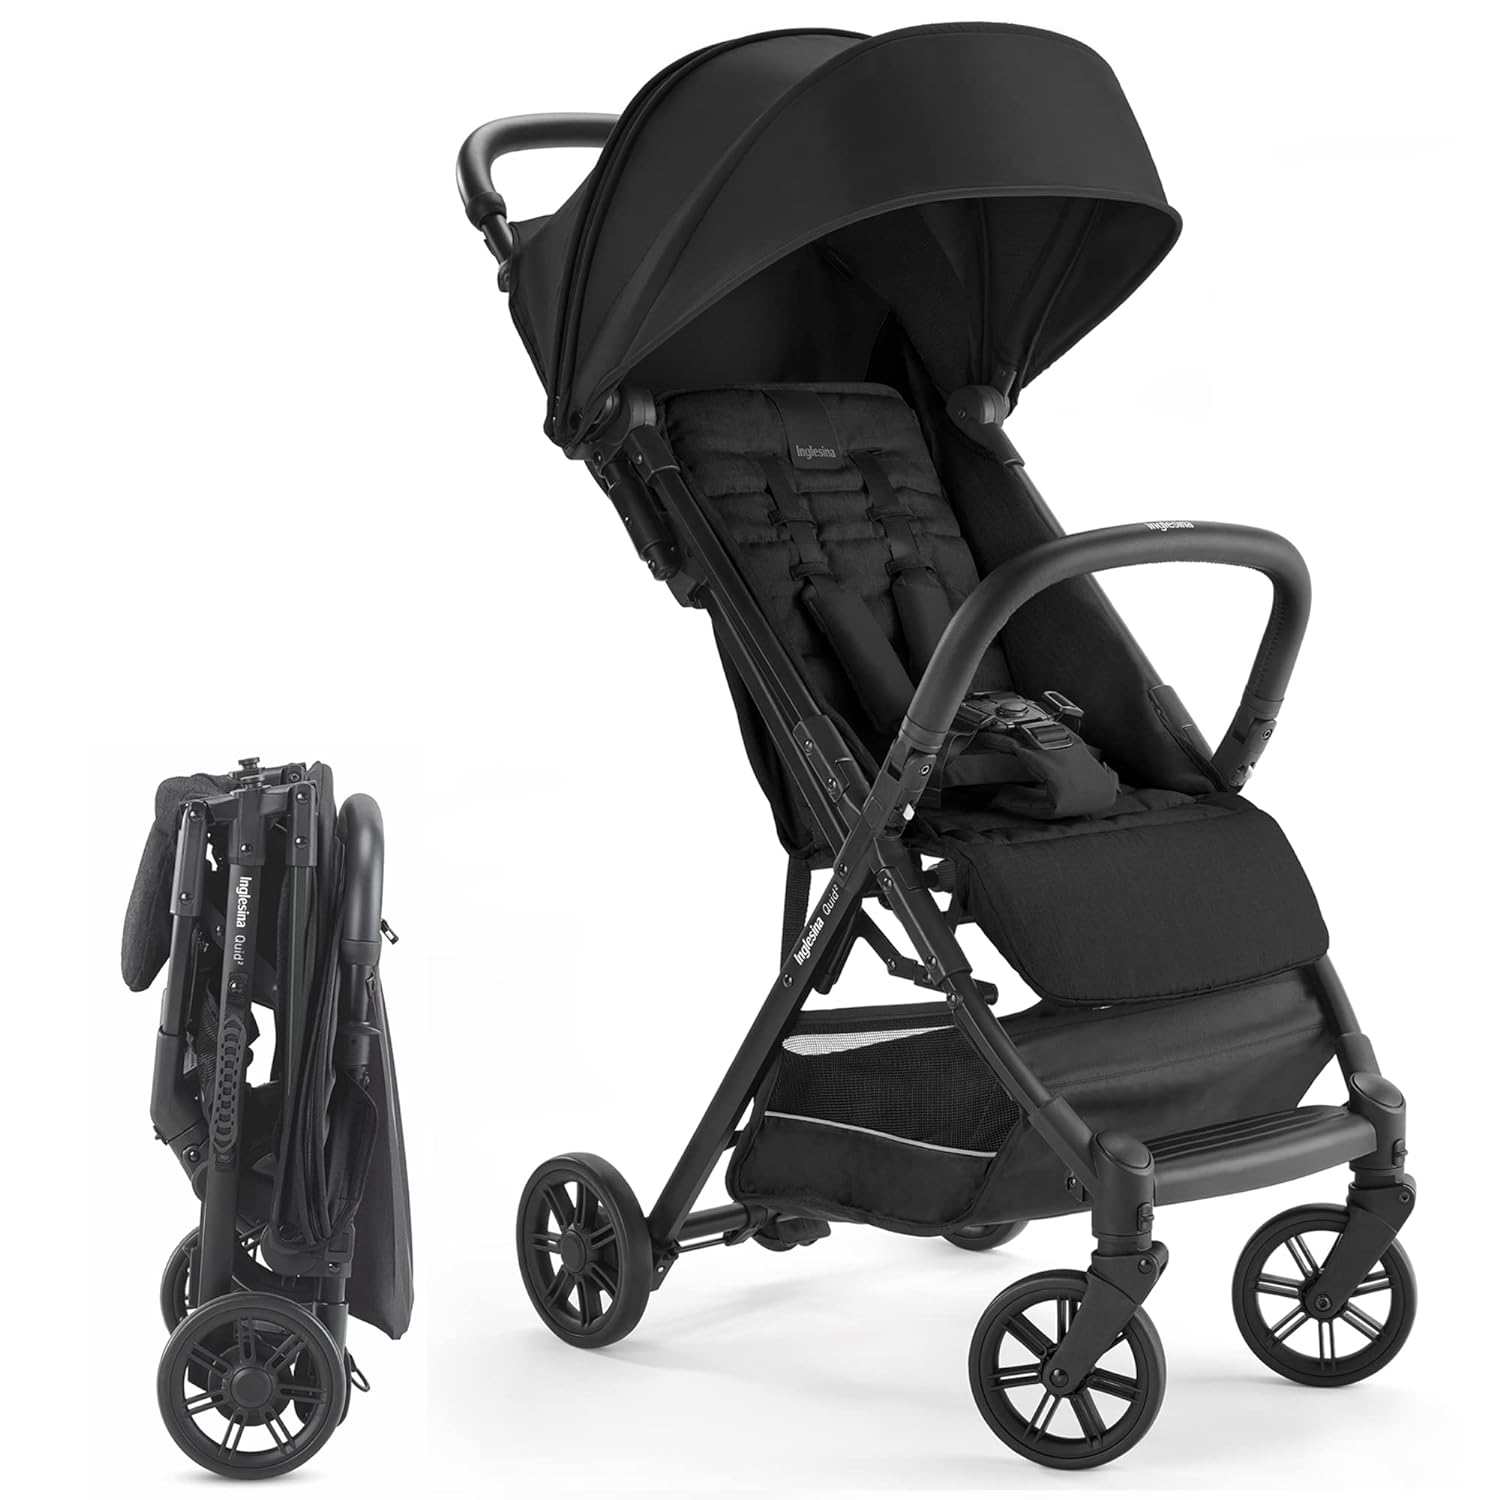 Inglesina Quid Baby Stroller - Lightweight at 13 lbs, Travel-Friendly, Ultra-Compact  Folding - Fits in Airplane Cabin  Overhead - for Toddlers from 3 Months to 50 lbs - Large Canopy, Onyx Black - Inglesina Quid Baby Stroller Review